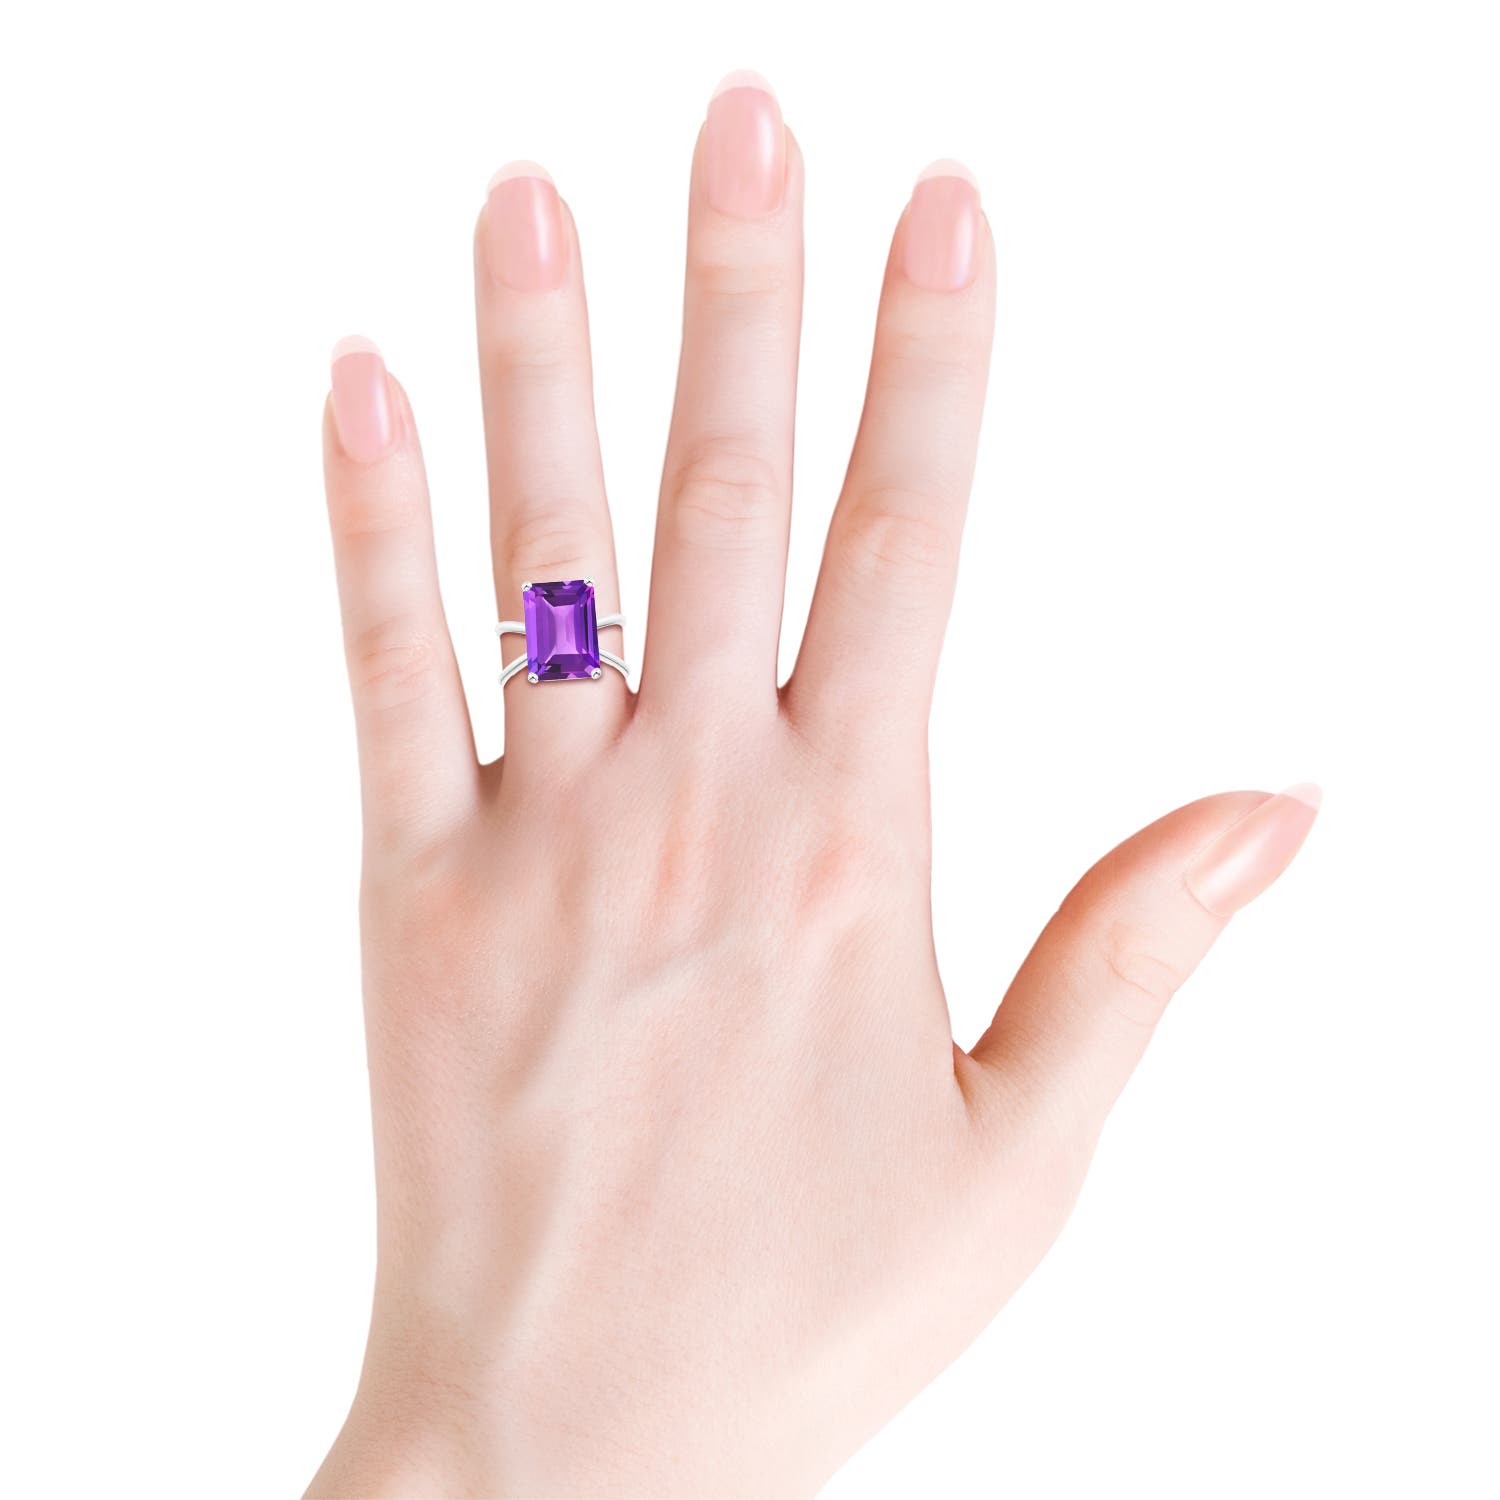 AAA - Amethyst / 6.5 CT / 14 KT White Gold